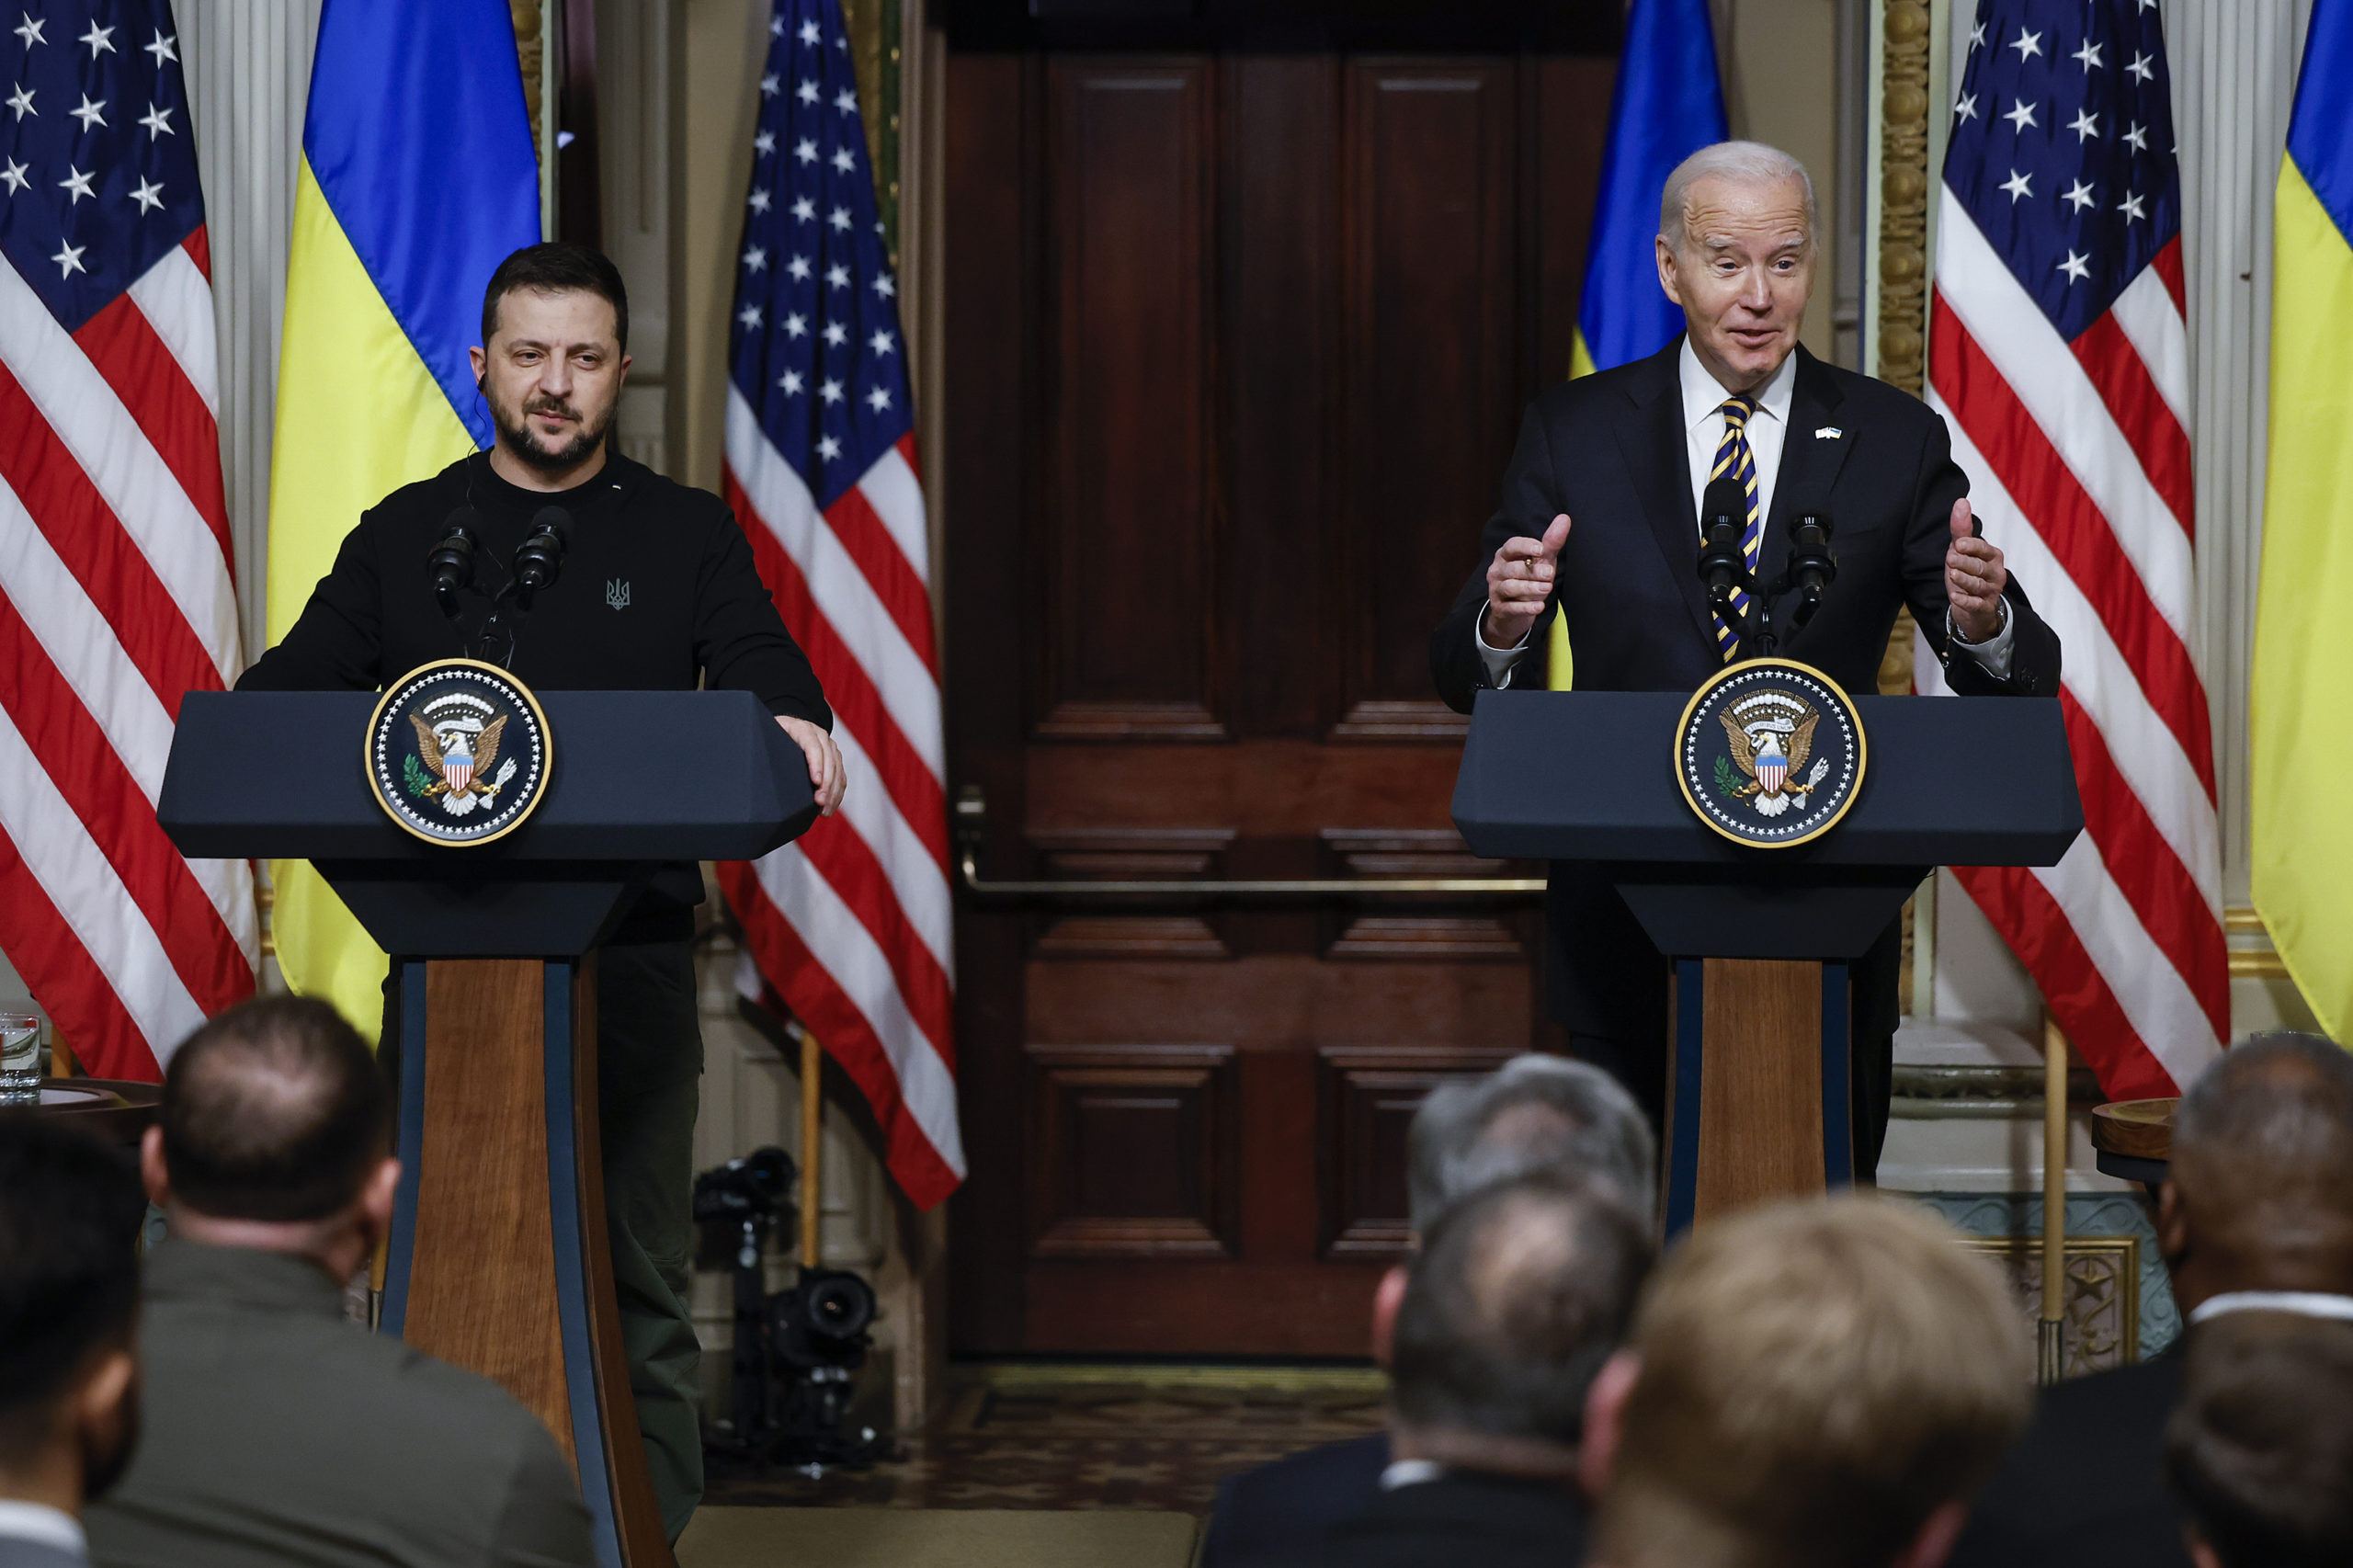 Ukrainian President Volodymyr Zelensky (L) and U.S. President Joe Biden hold a news conference in the Indian Treaty Room of the Eisenhower Executive Office Building on December 12, 2023 in Washington, DC. Zelensky is in Washington meeting with Biden and Congressional leaders to make an in-person case for continued military aid as Ukraine runs out of money for their war against Russia. The meetings come days after the U.S. Senate failed to advance Biden's proposed national security package that included emergency aid to Ukraine and Israel. (Photo by Chip Somodevilla/Getty Images)